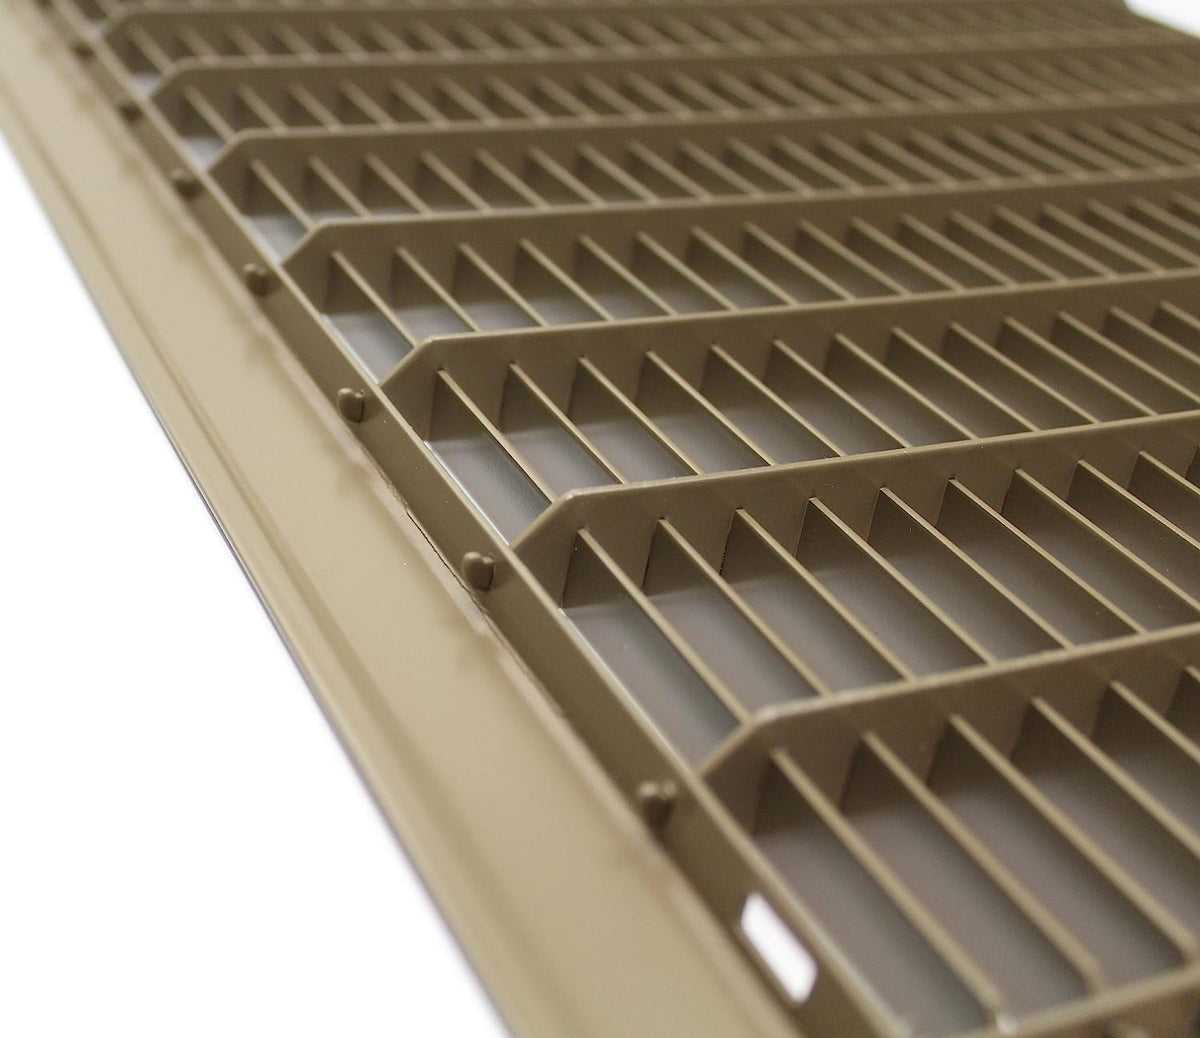 12&quot; X 14&quot; or 14&quot; x 12&quot; Heavy Duty Floor Grille - Fixed Blades Air Grille - Brown [Outer Dimensions: 13.75 X 15.75]